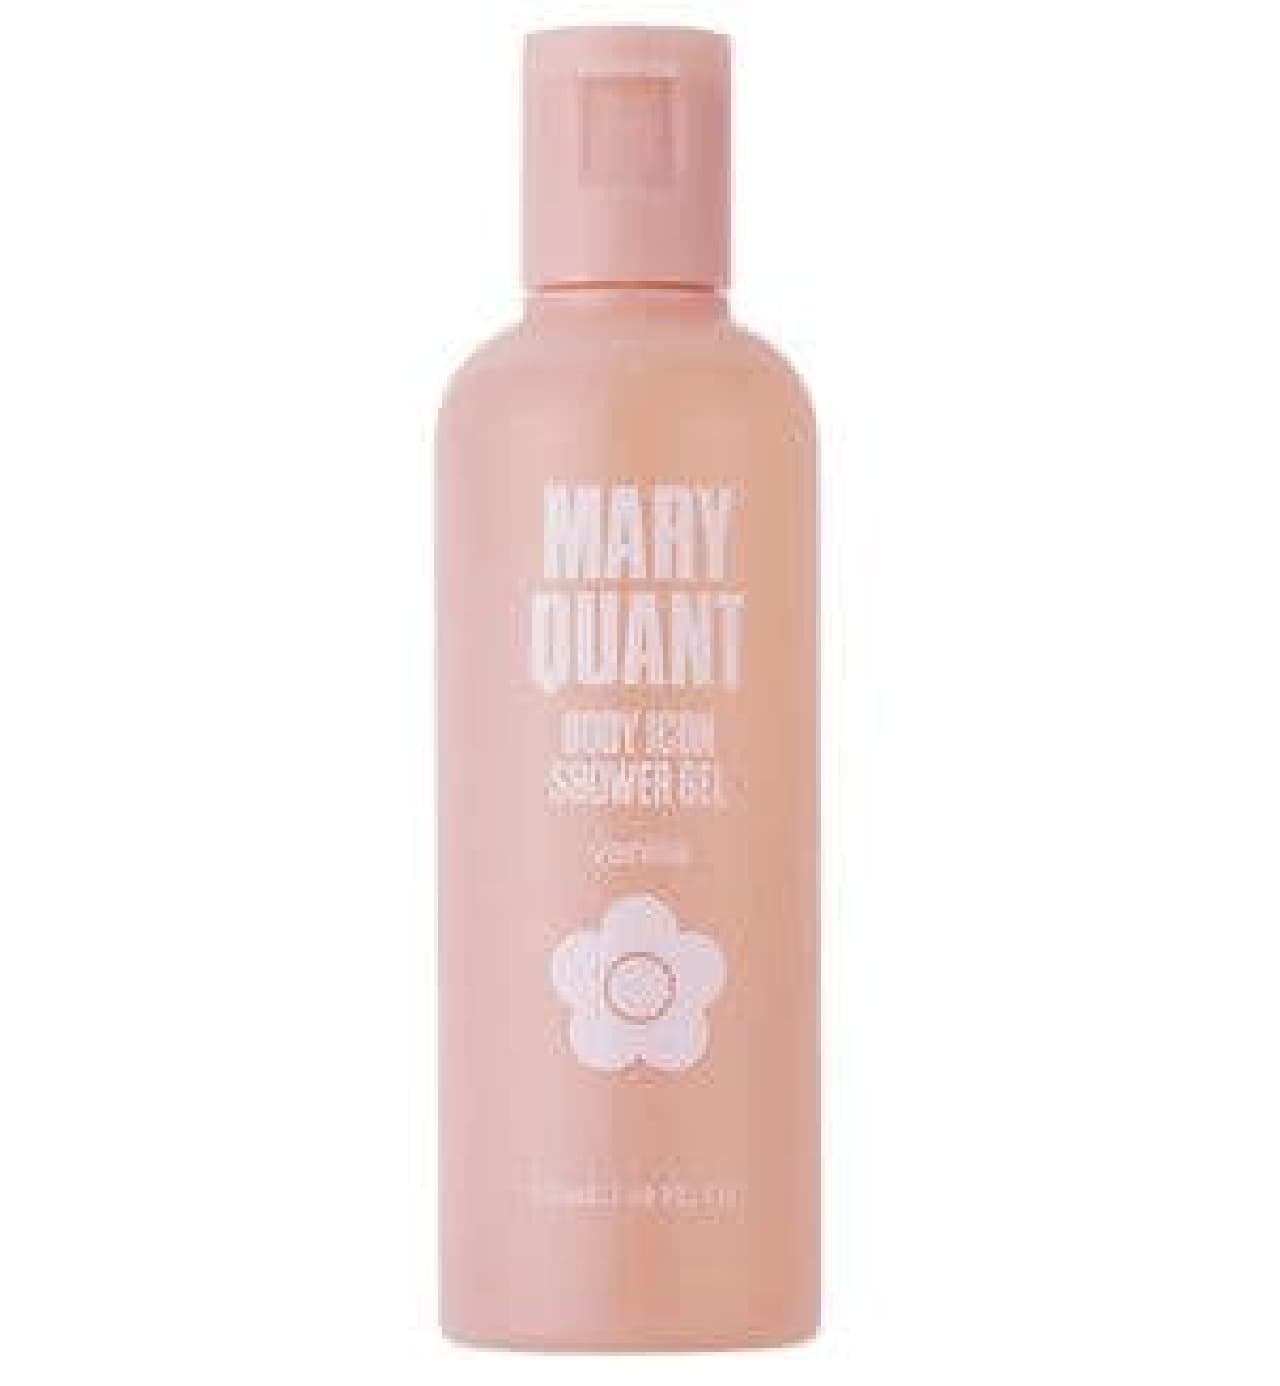 Mary Quant "Body Icon Shower Gel"